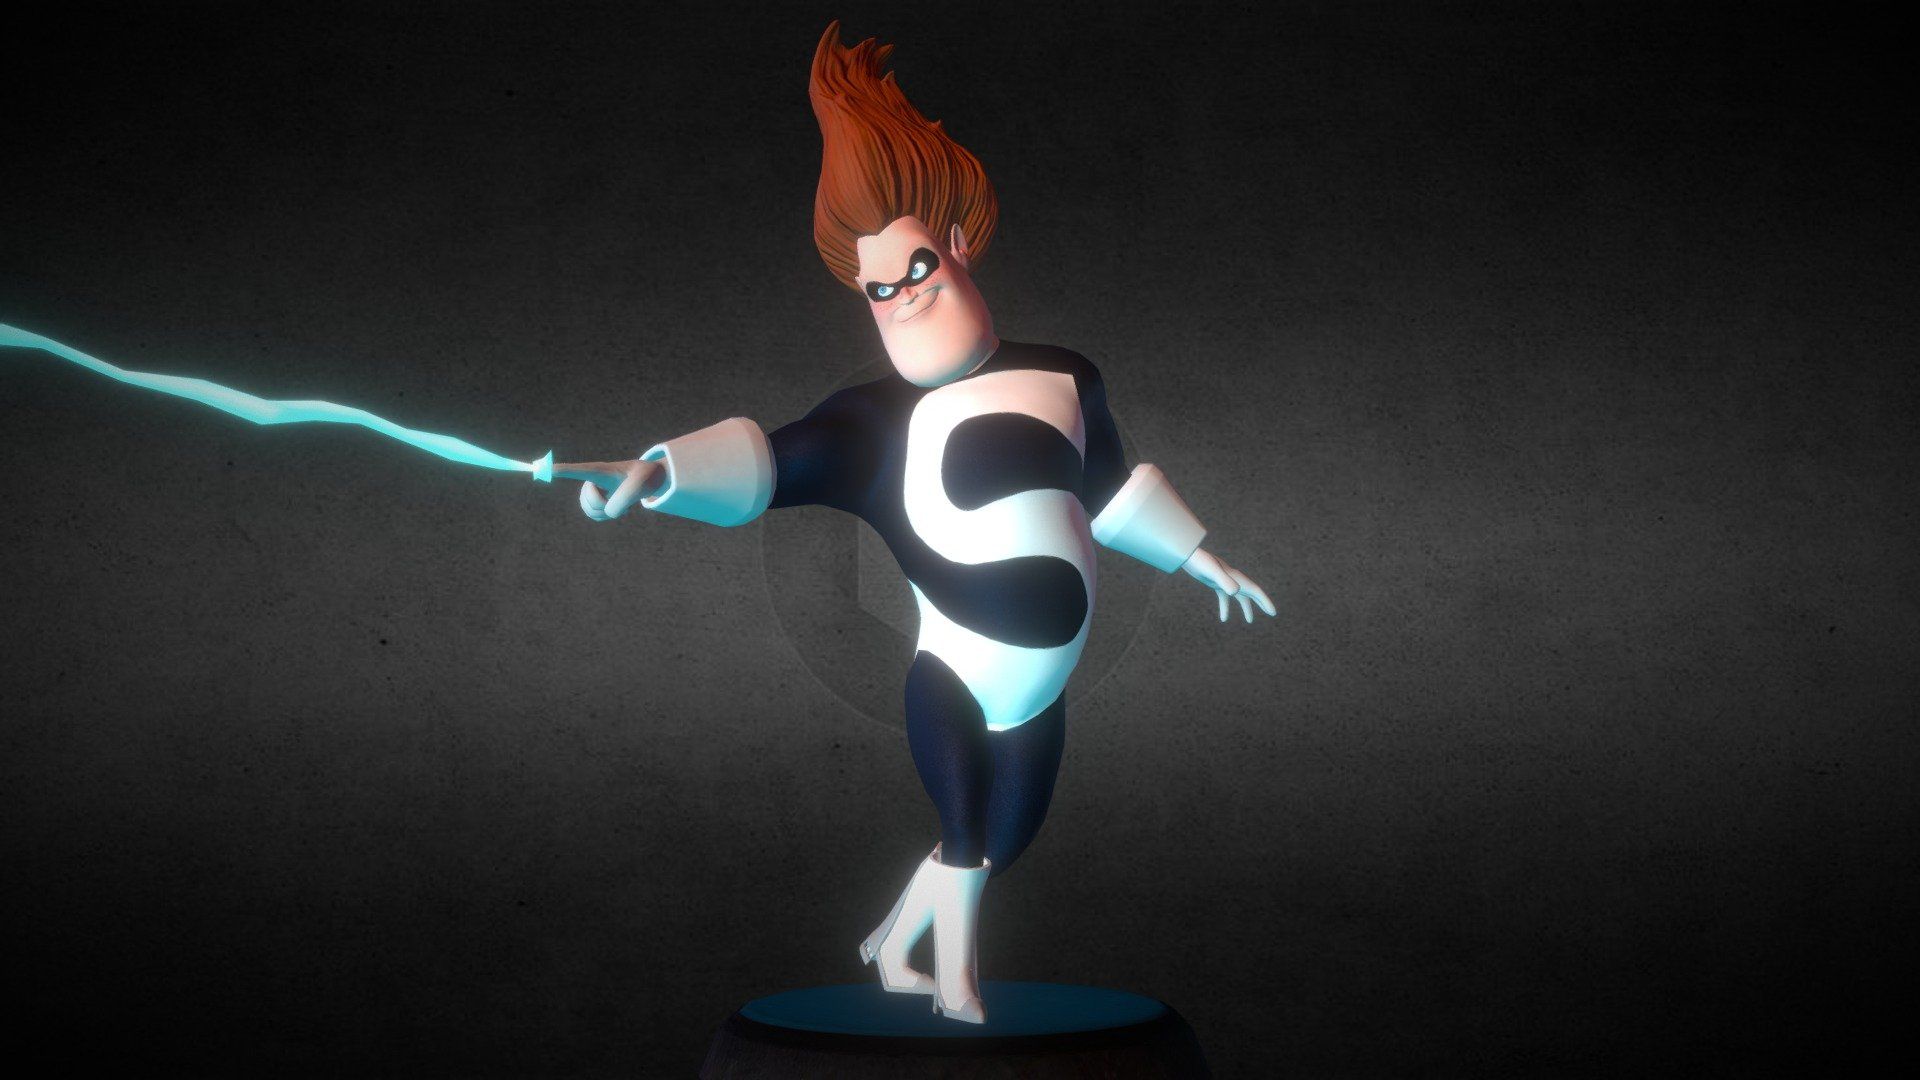 Syndrome- Inspired by The Incredibles [PBR] model by mikebauerlein [d9ddeef]